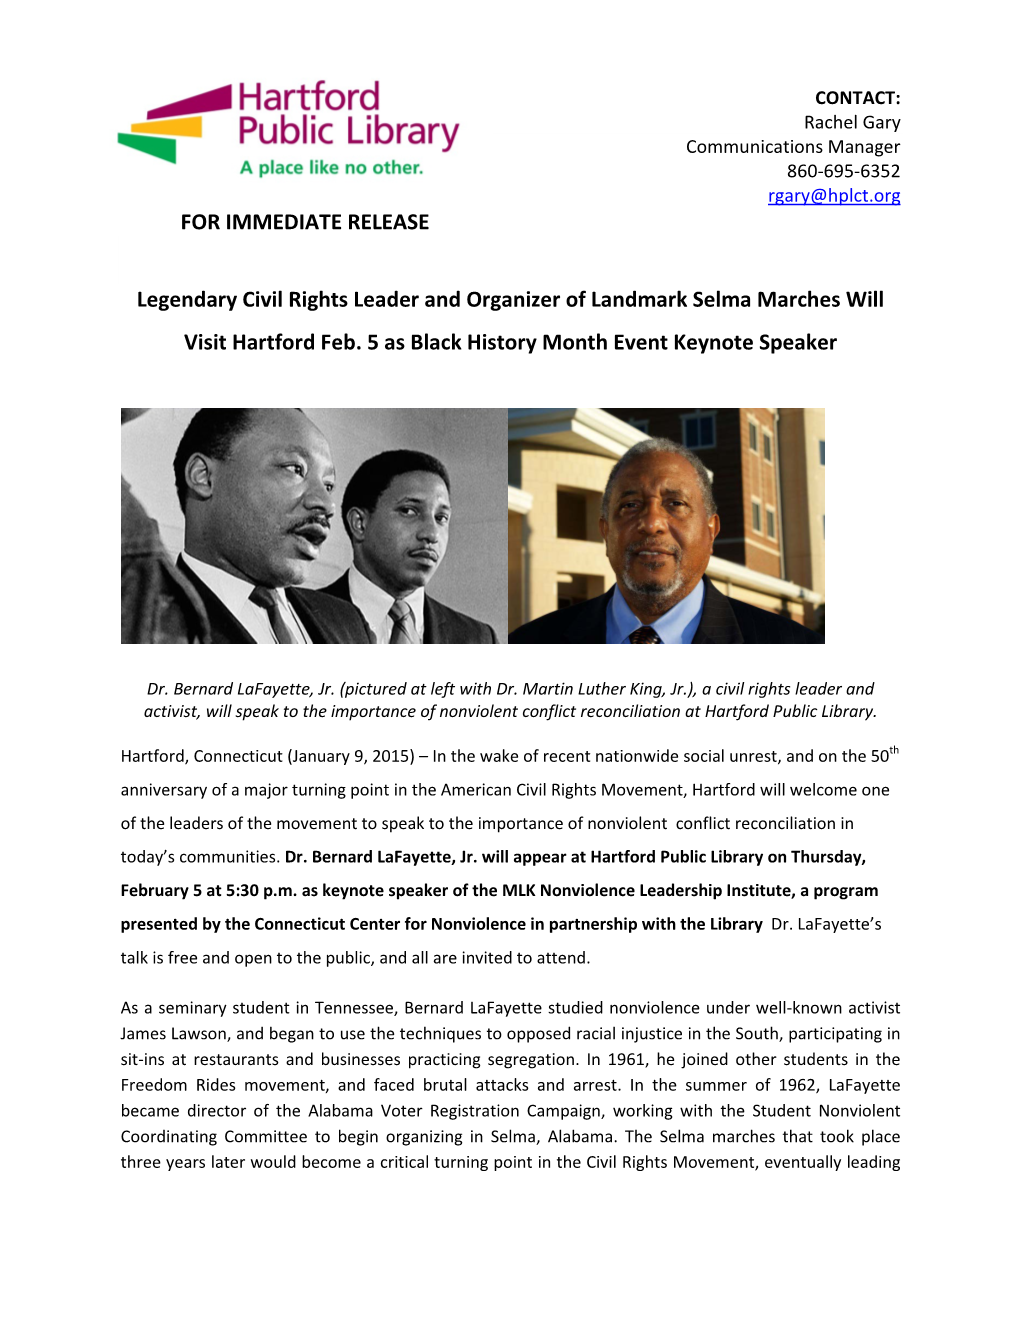 FOR IMMEDIATE RELEASE Legendary Civil Rights Leader And